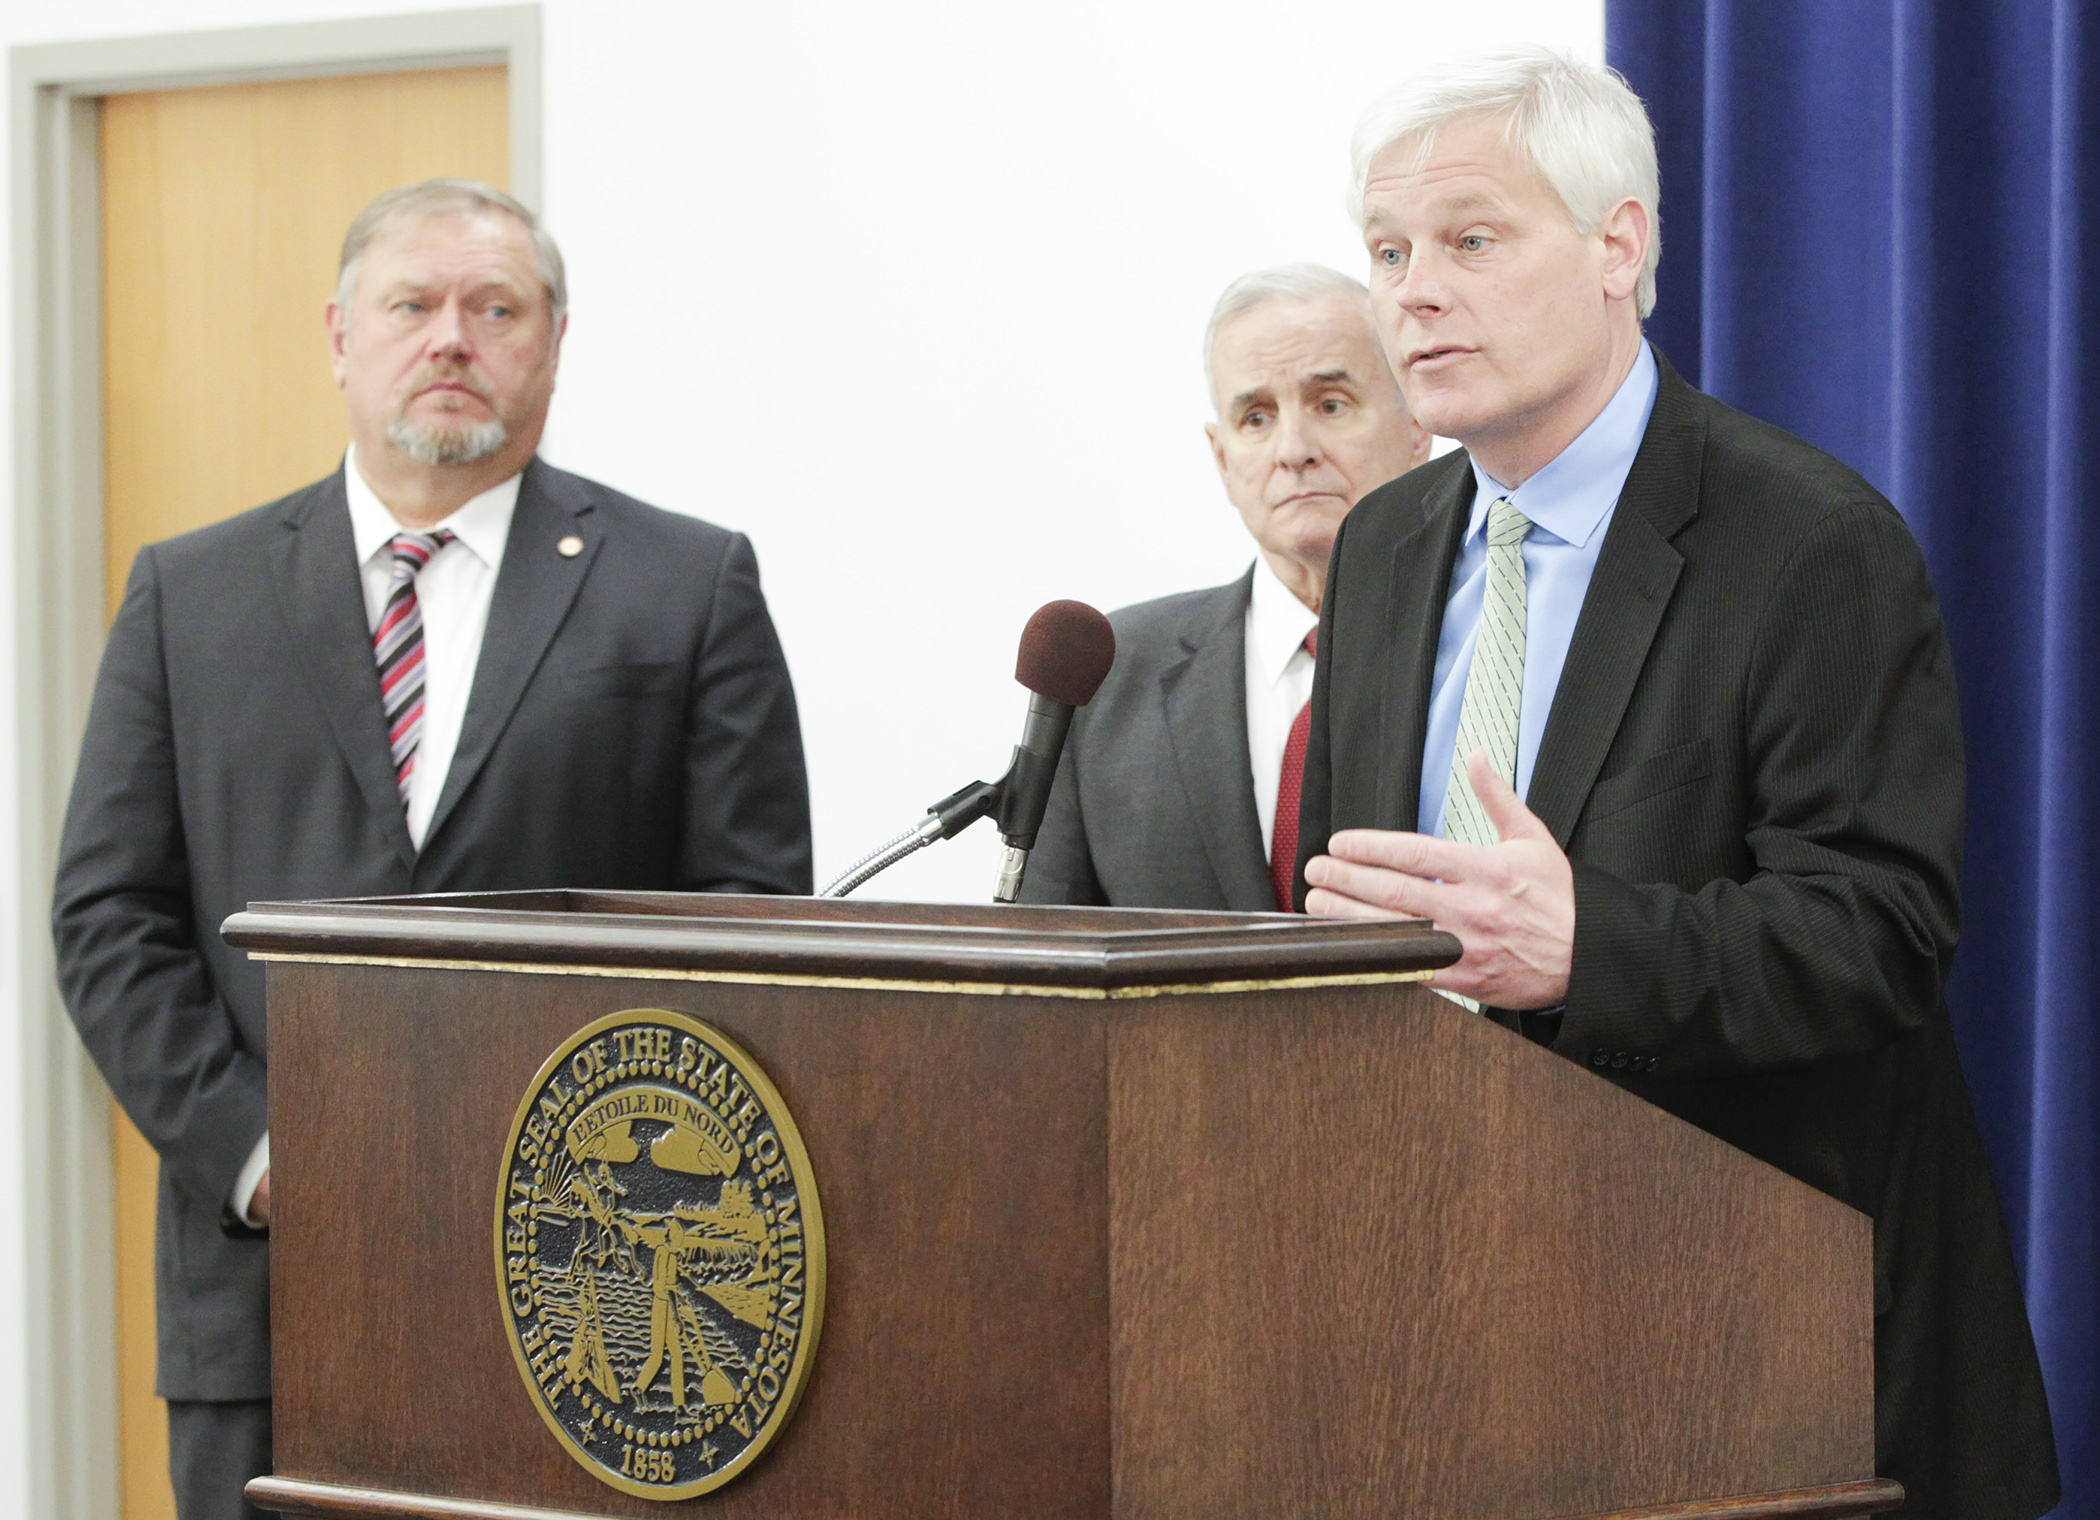 House Minority Leader Paul Thissen is joined by Senate Majority Leader Tom Bakk, left, and Gov. Mark Dayton at a May 4 news conference where they urged House Republican leaders to release their bonding bill. Photo by Paul Battaglia